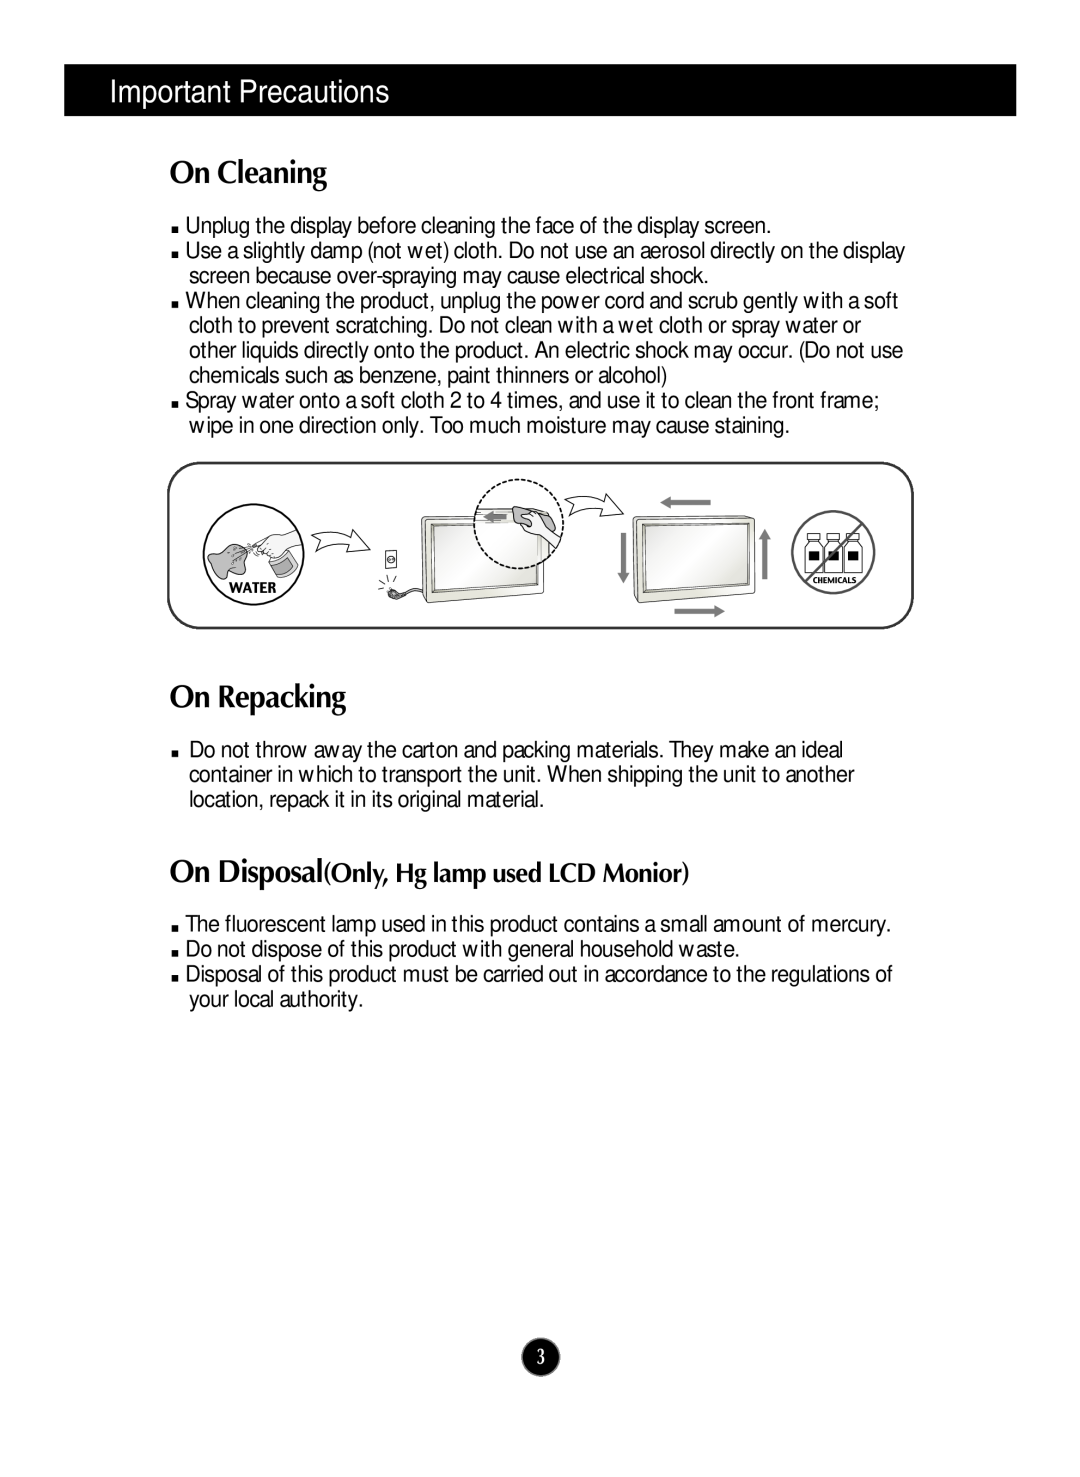 LG Electronics W2220P manual On Cleaning, On Repacking, On DisposalOnly, Hg lamp used LCD Monior, Important Precautions 